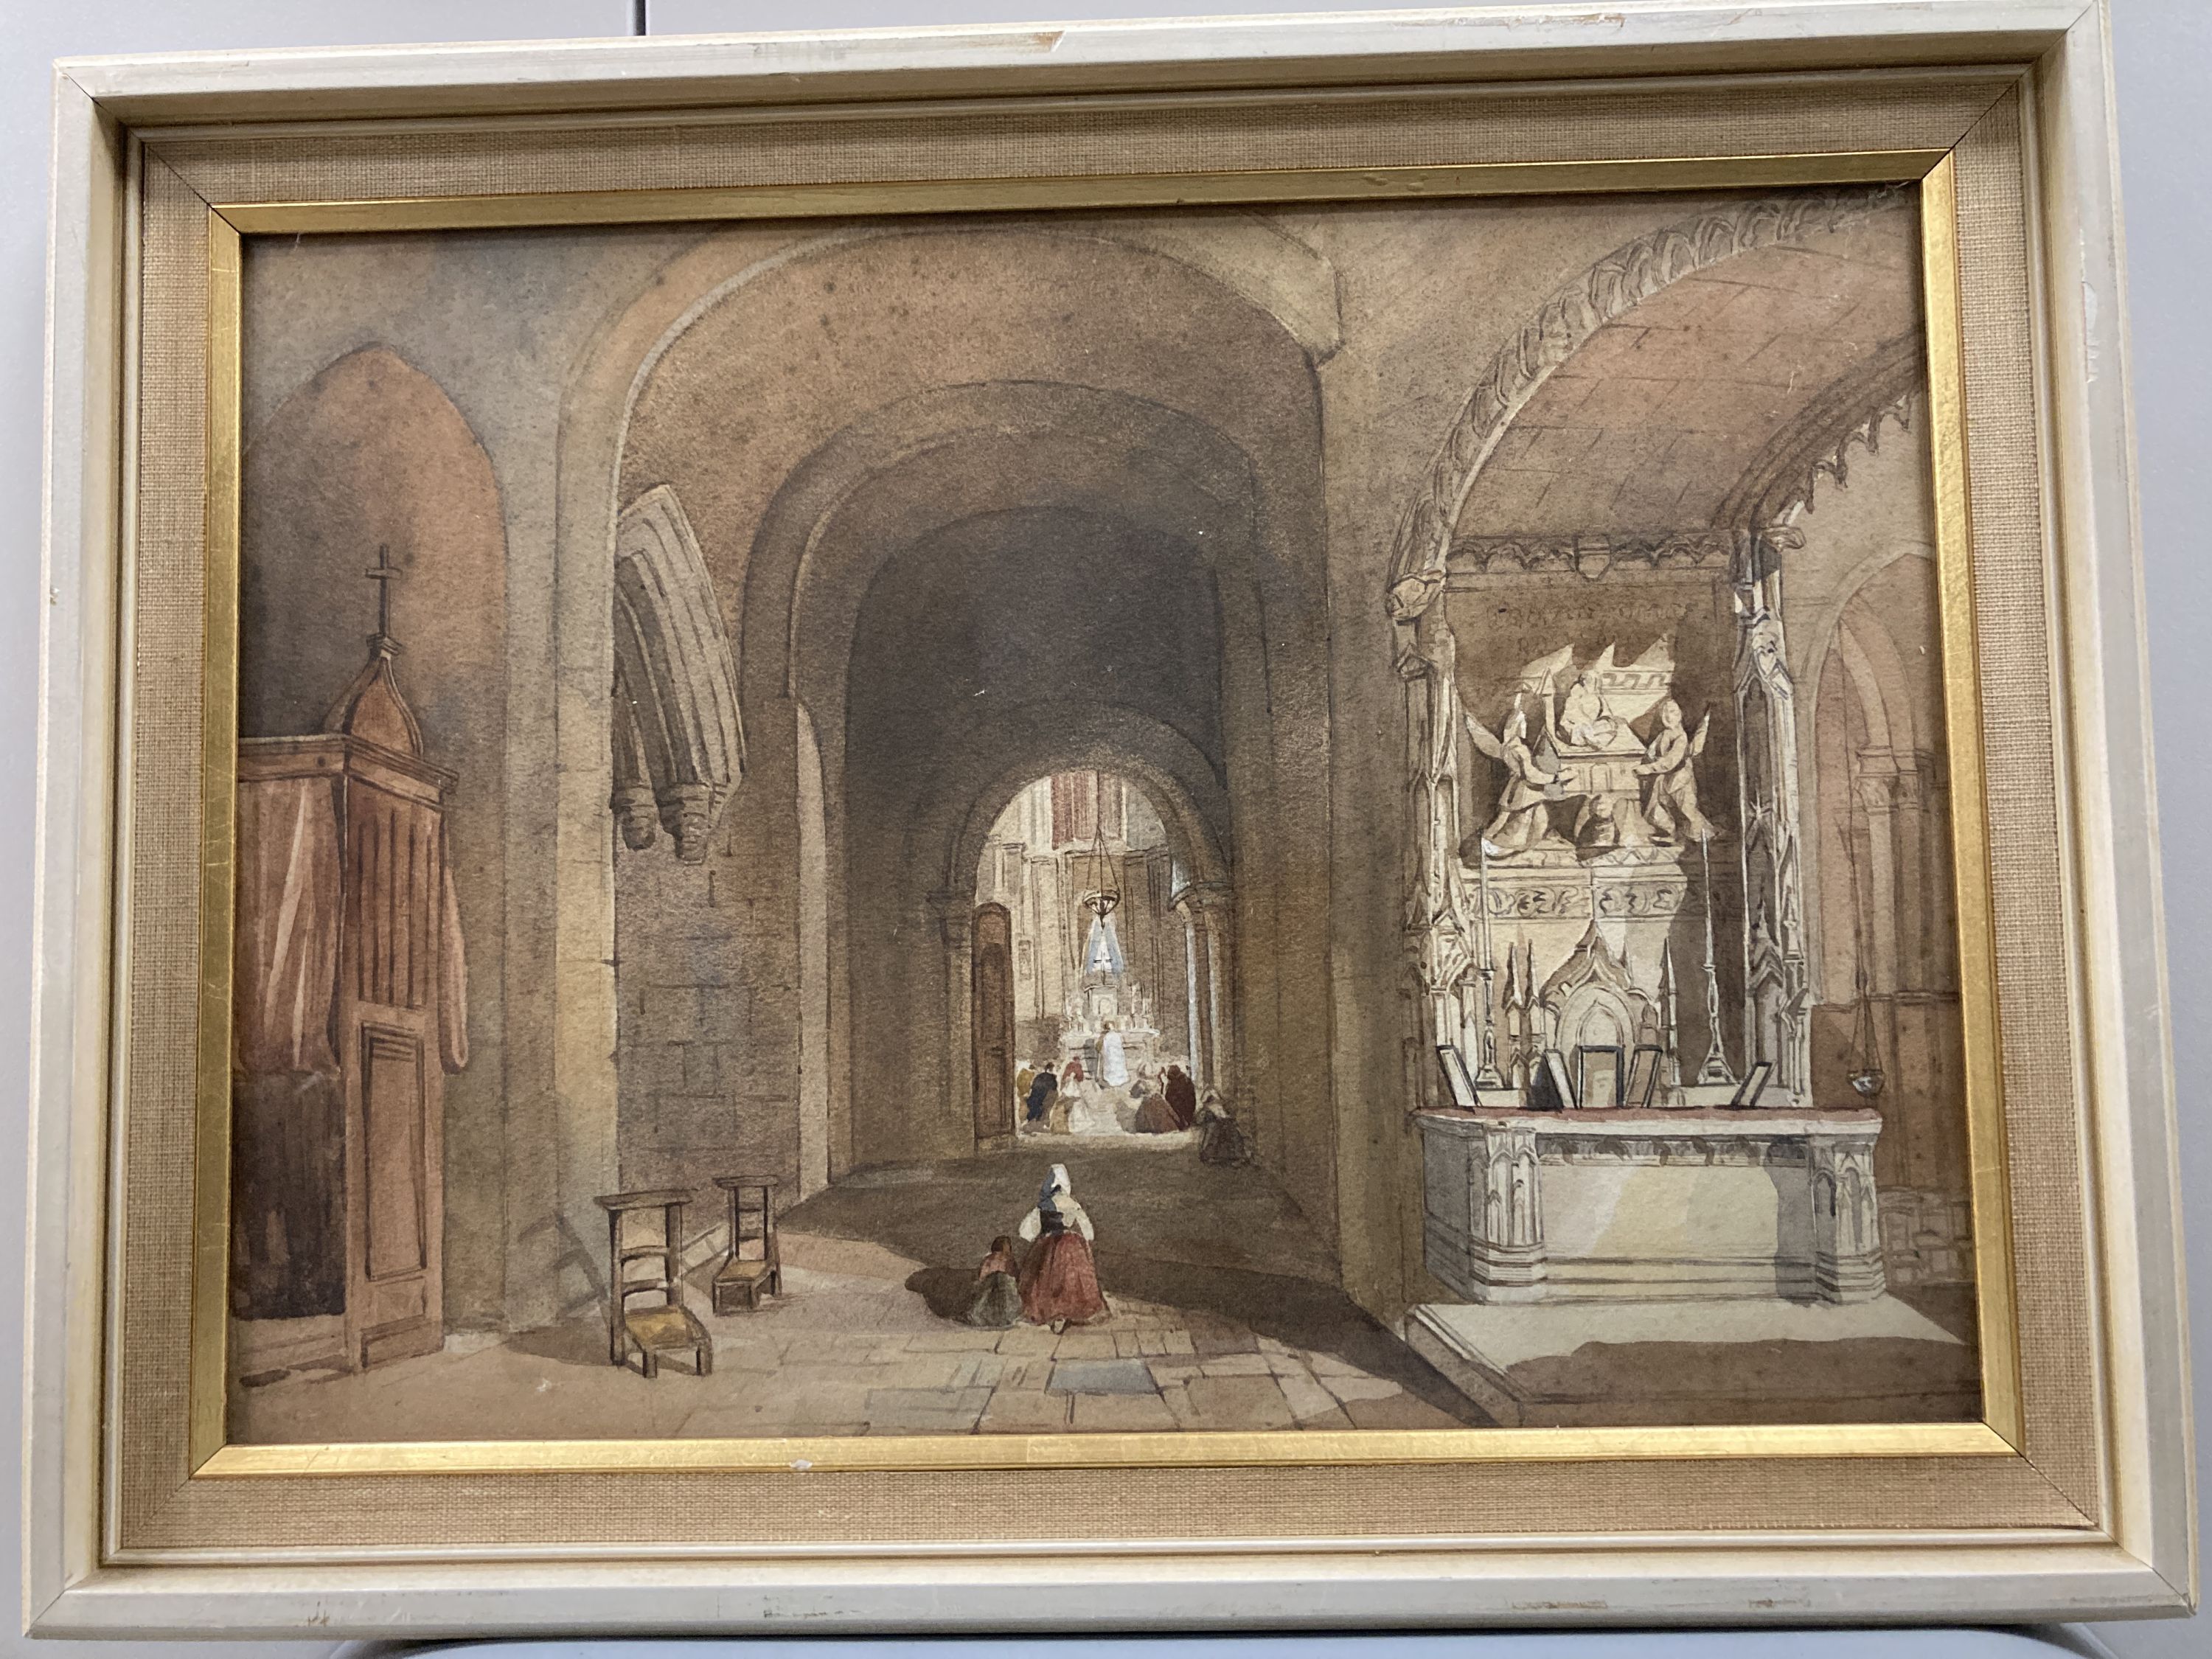 Attrib. to Samuel Gillespie Prout (1822-1911), French church interior, watercolour and a pair of watercolours attributed to Henry Woods